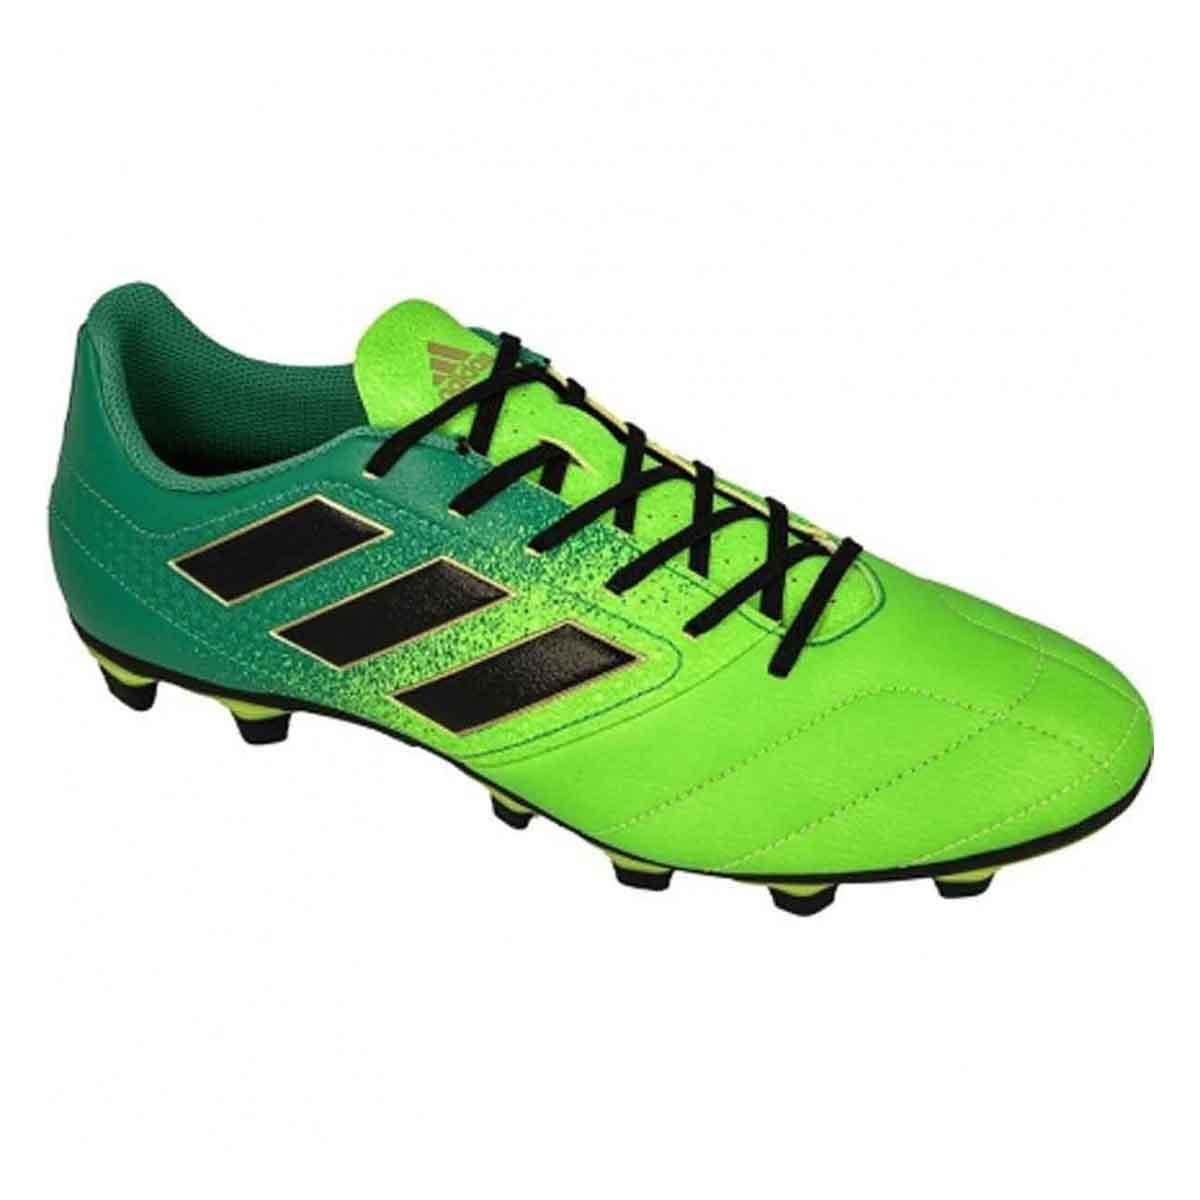 Adidas ACE 17.4 FXG Football Shoes Online India